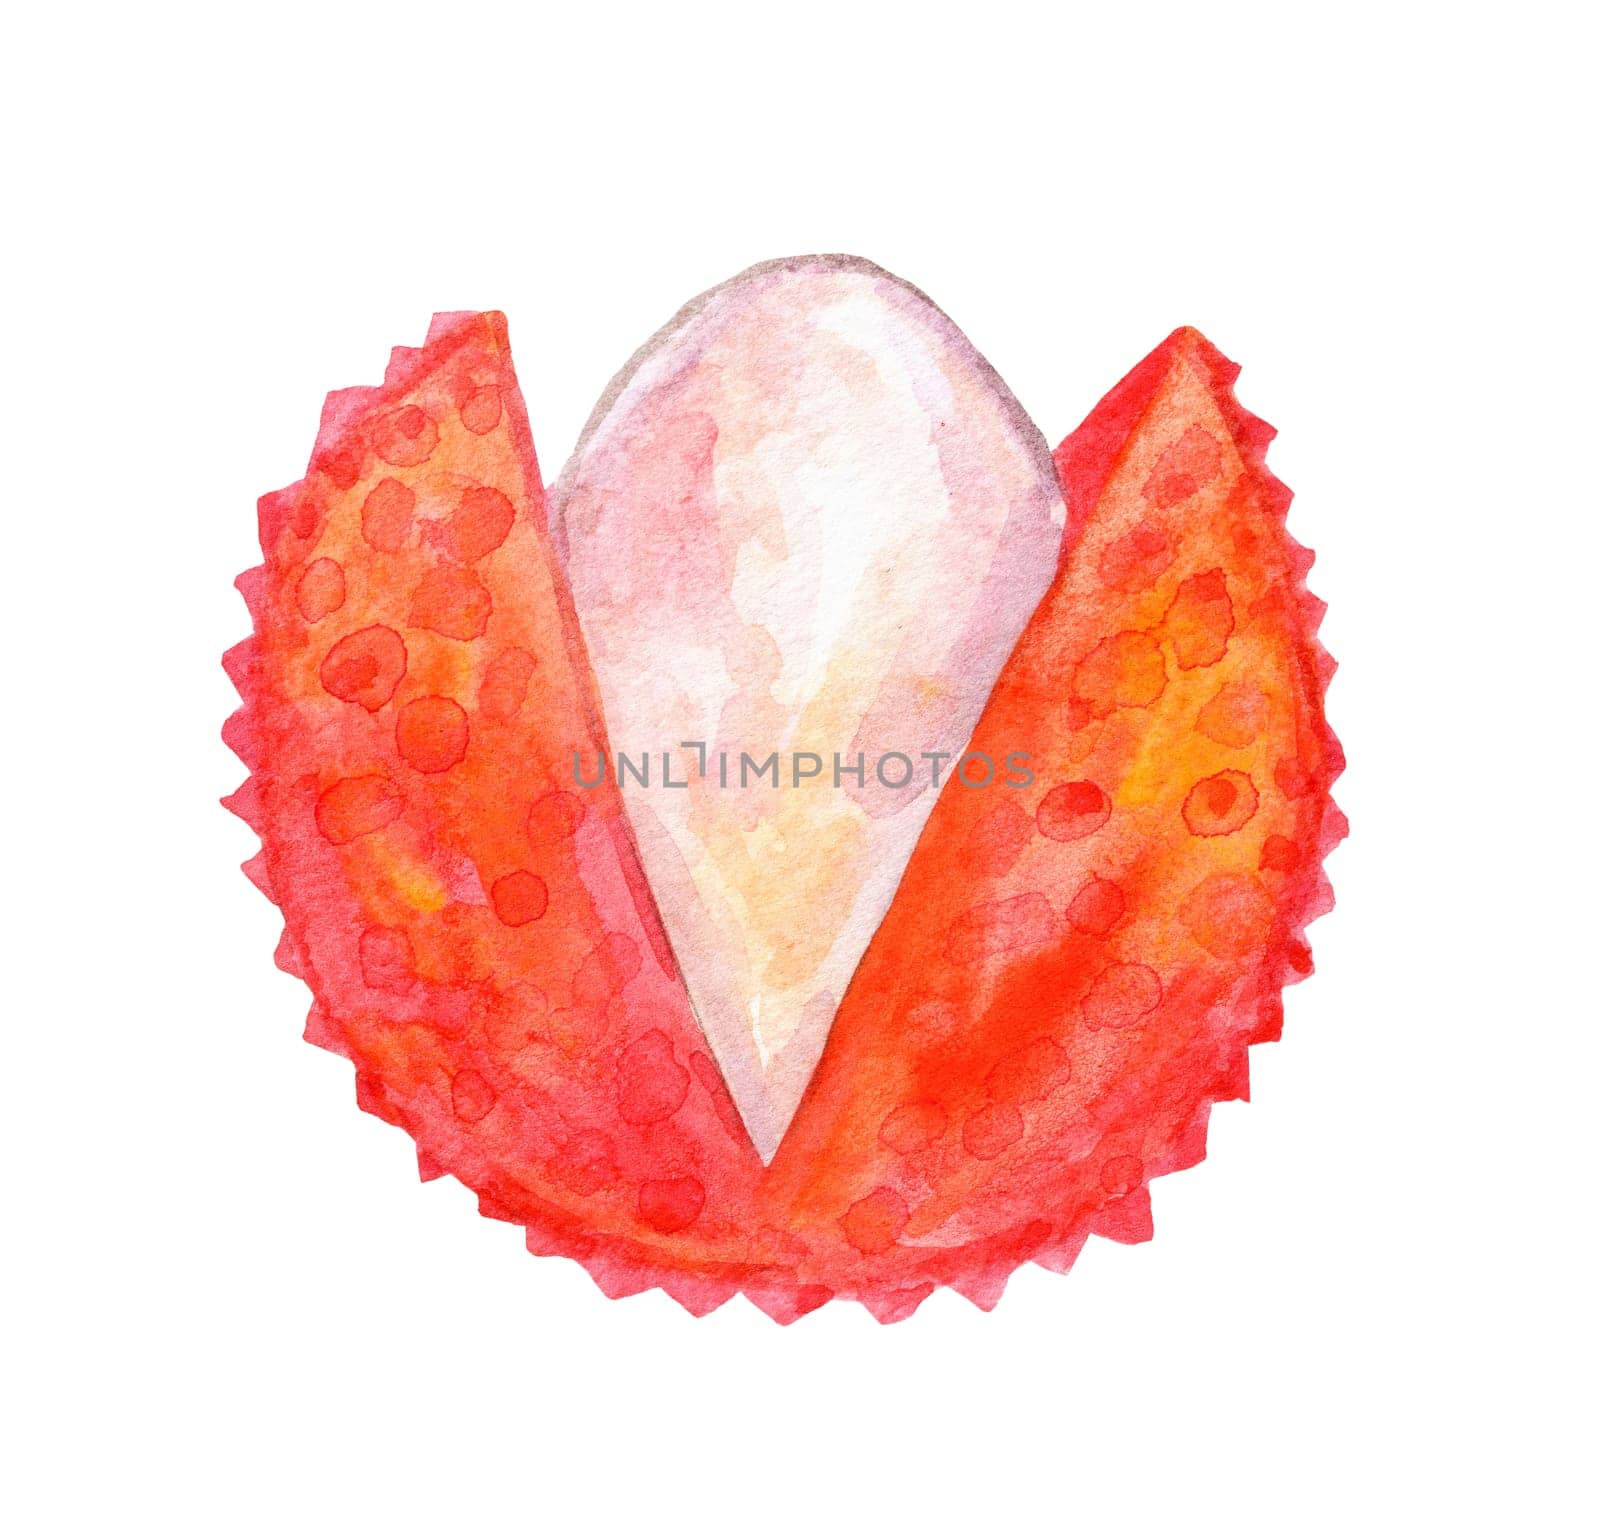 Watercolor cut lychee fruit illustration isolated on white by dreamloud